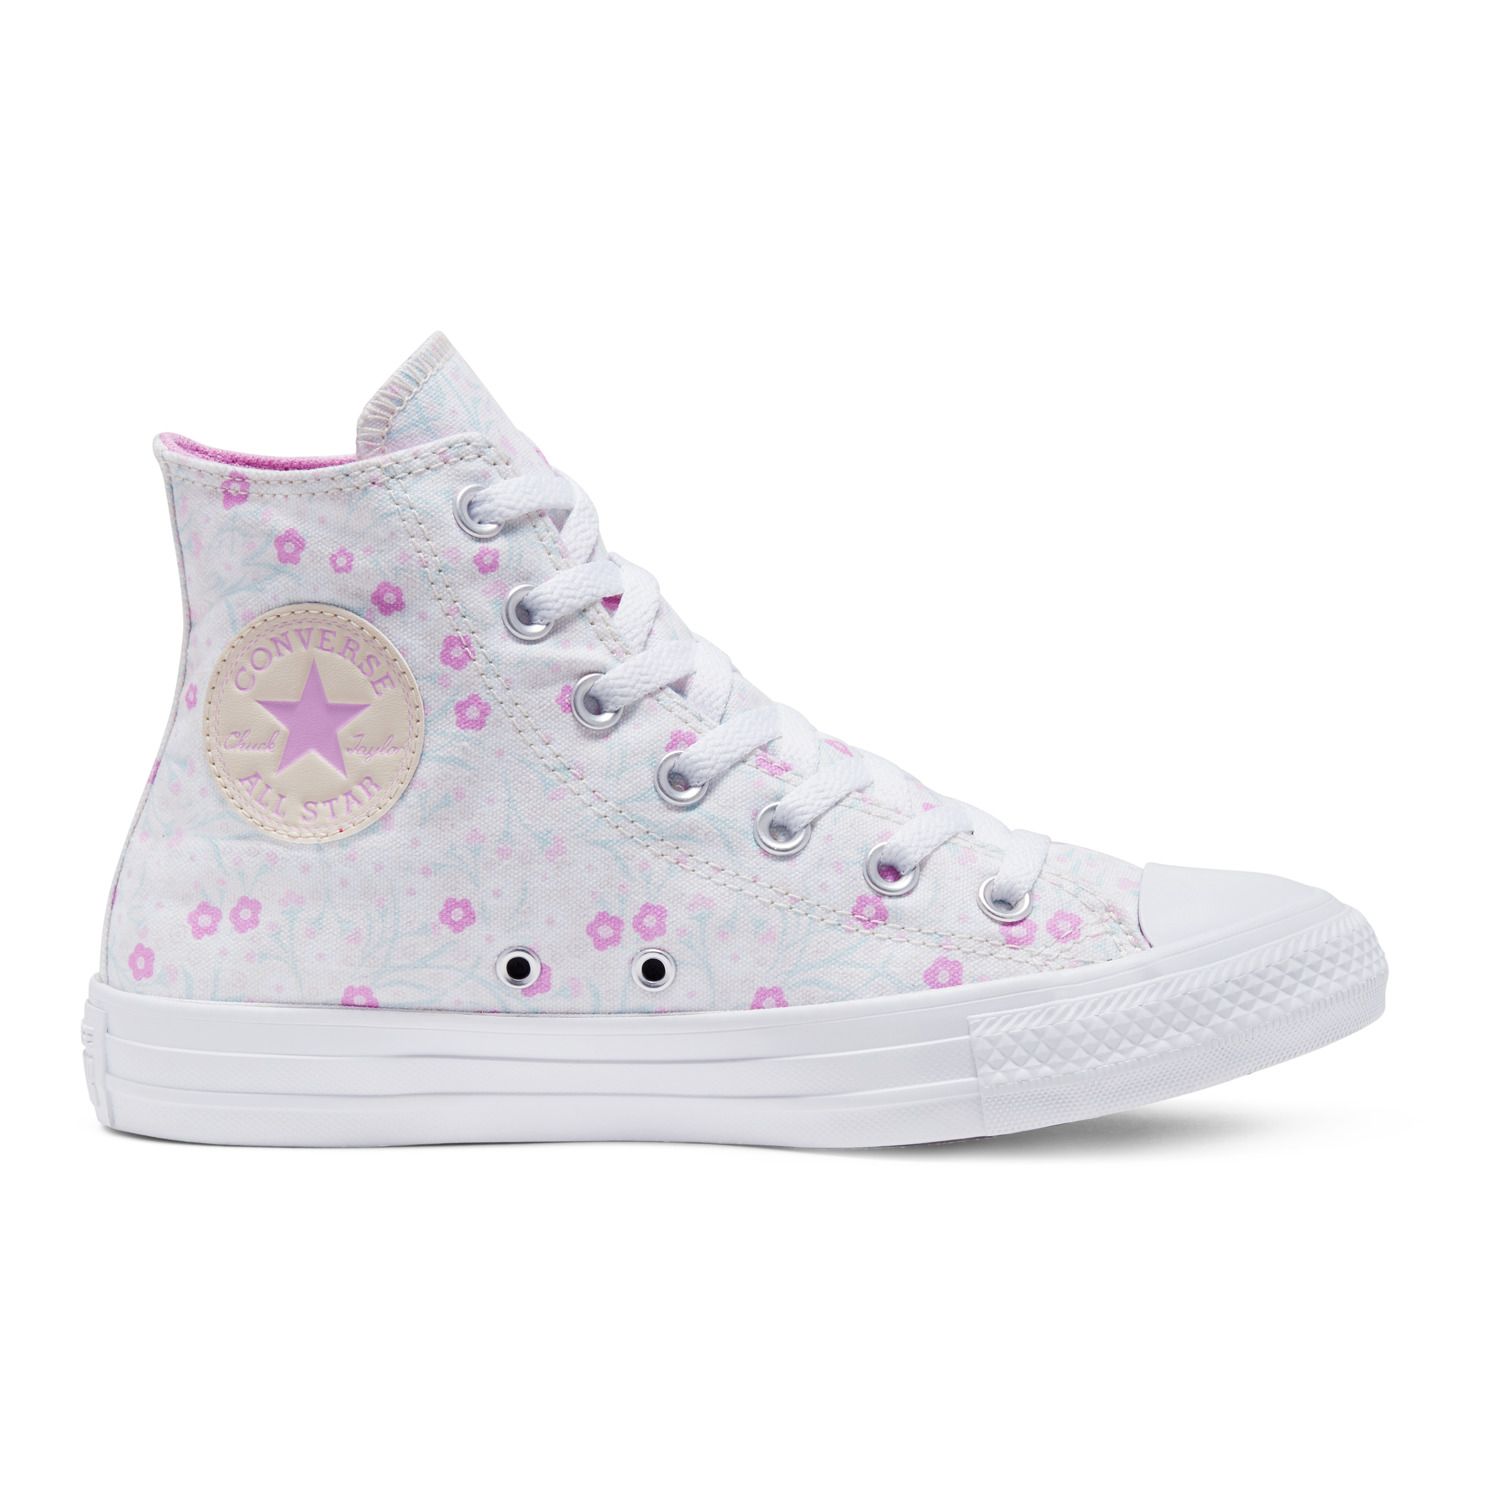 converse women's chuck taylor all star high top sneakers